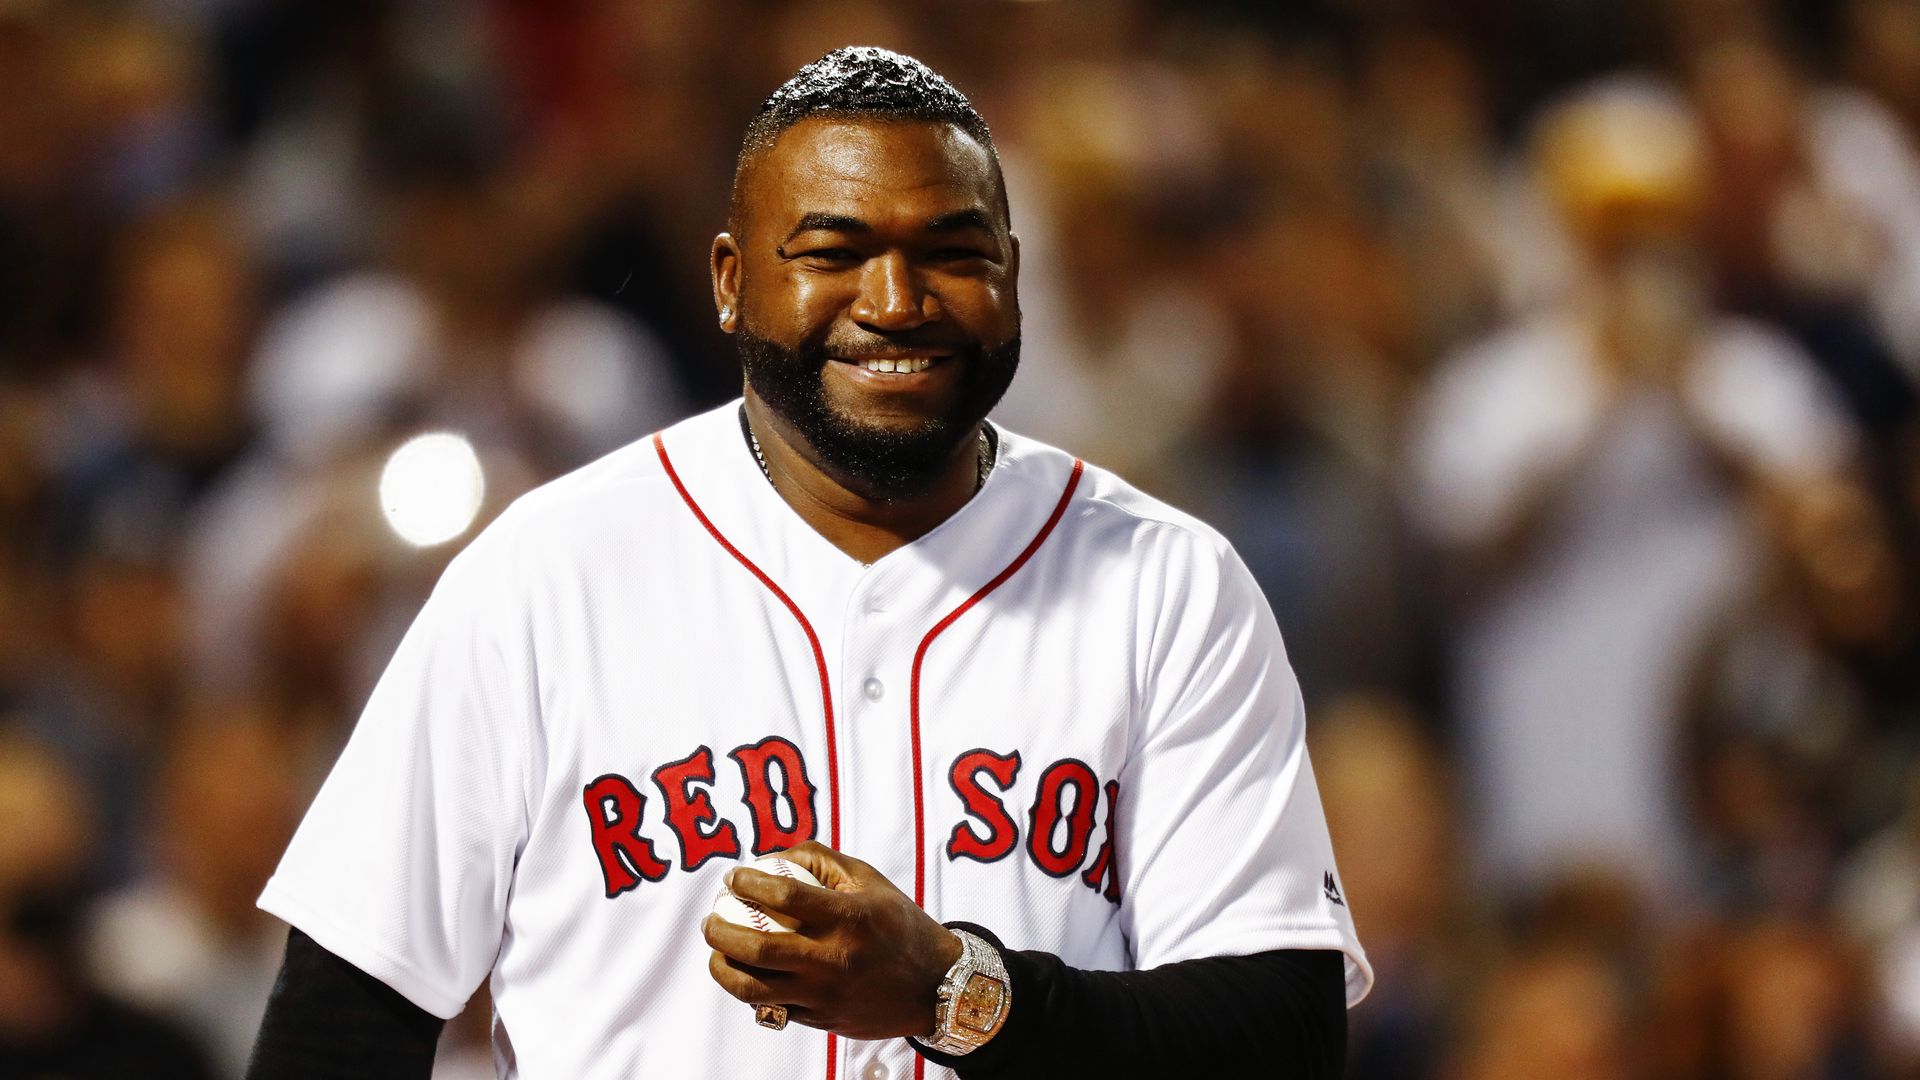 Photo of David Ortiz in a white Red Sox uniform. He's standing in a stadium, grinning and holding a baseball in his left hand.